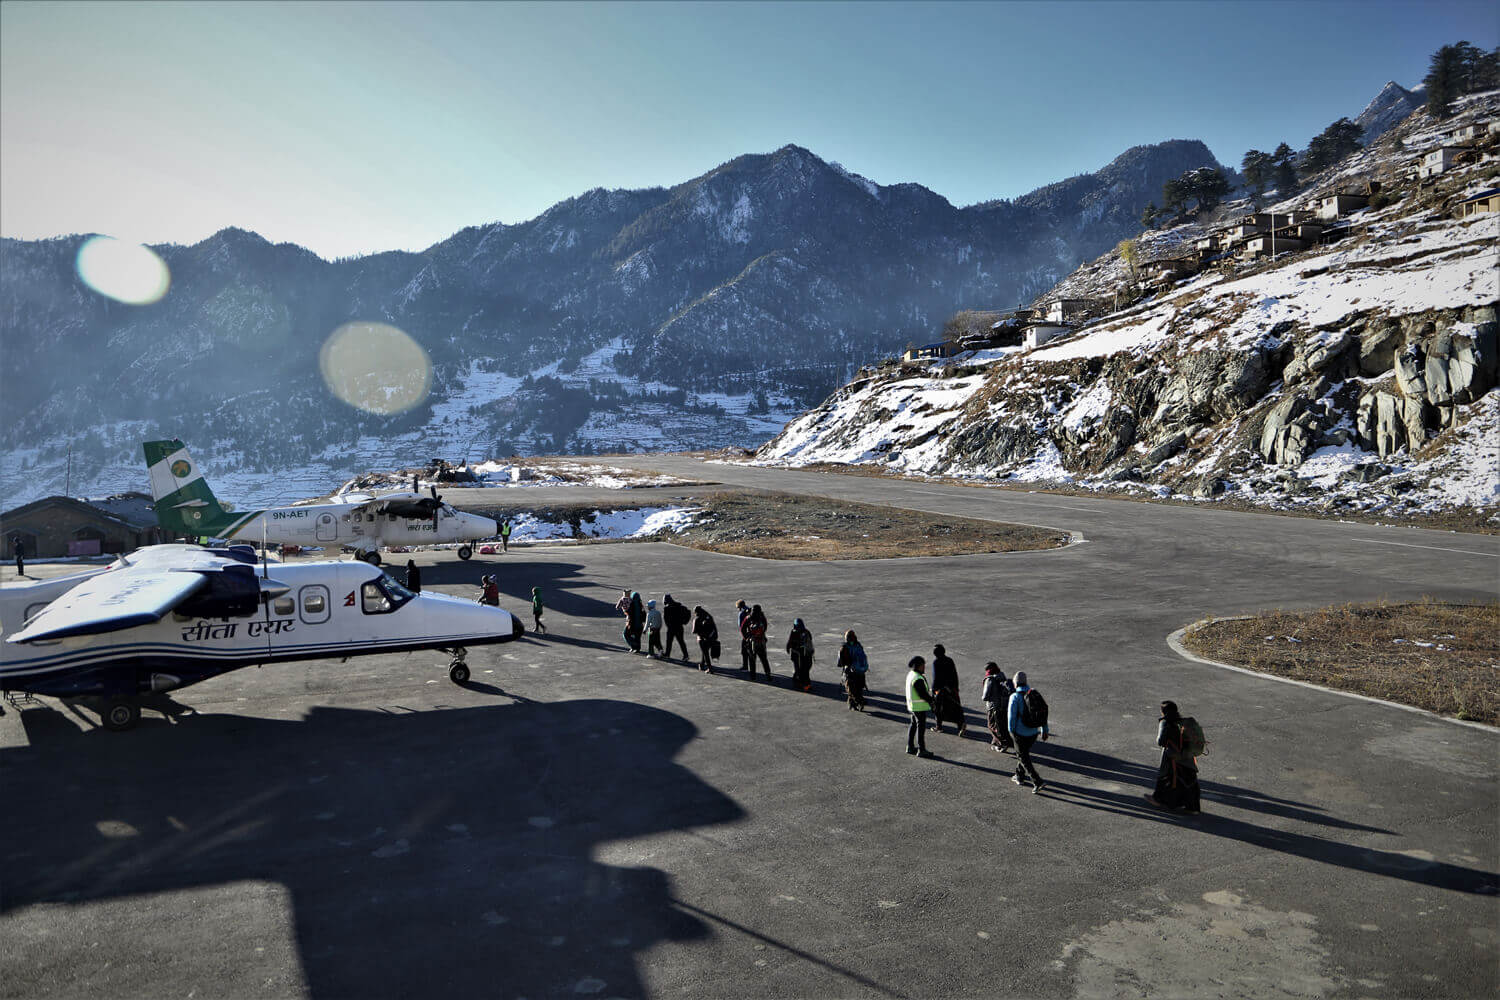 Juphal Airport Dolpa - Aviation in Nepal (Internet Photo)